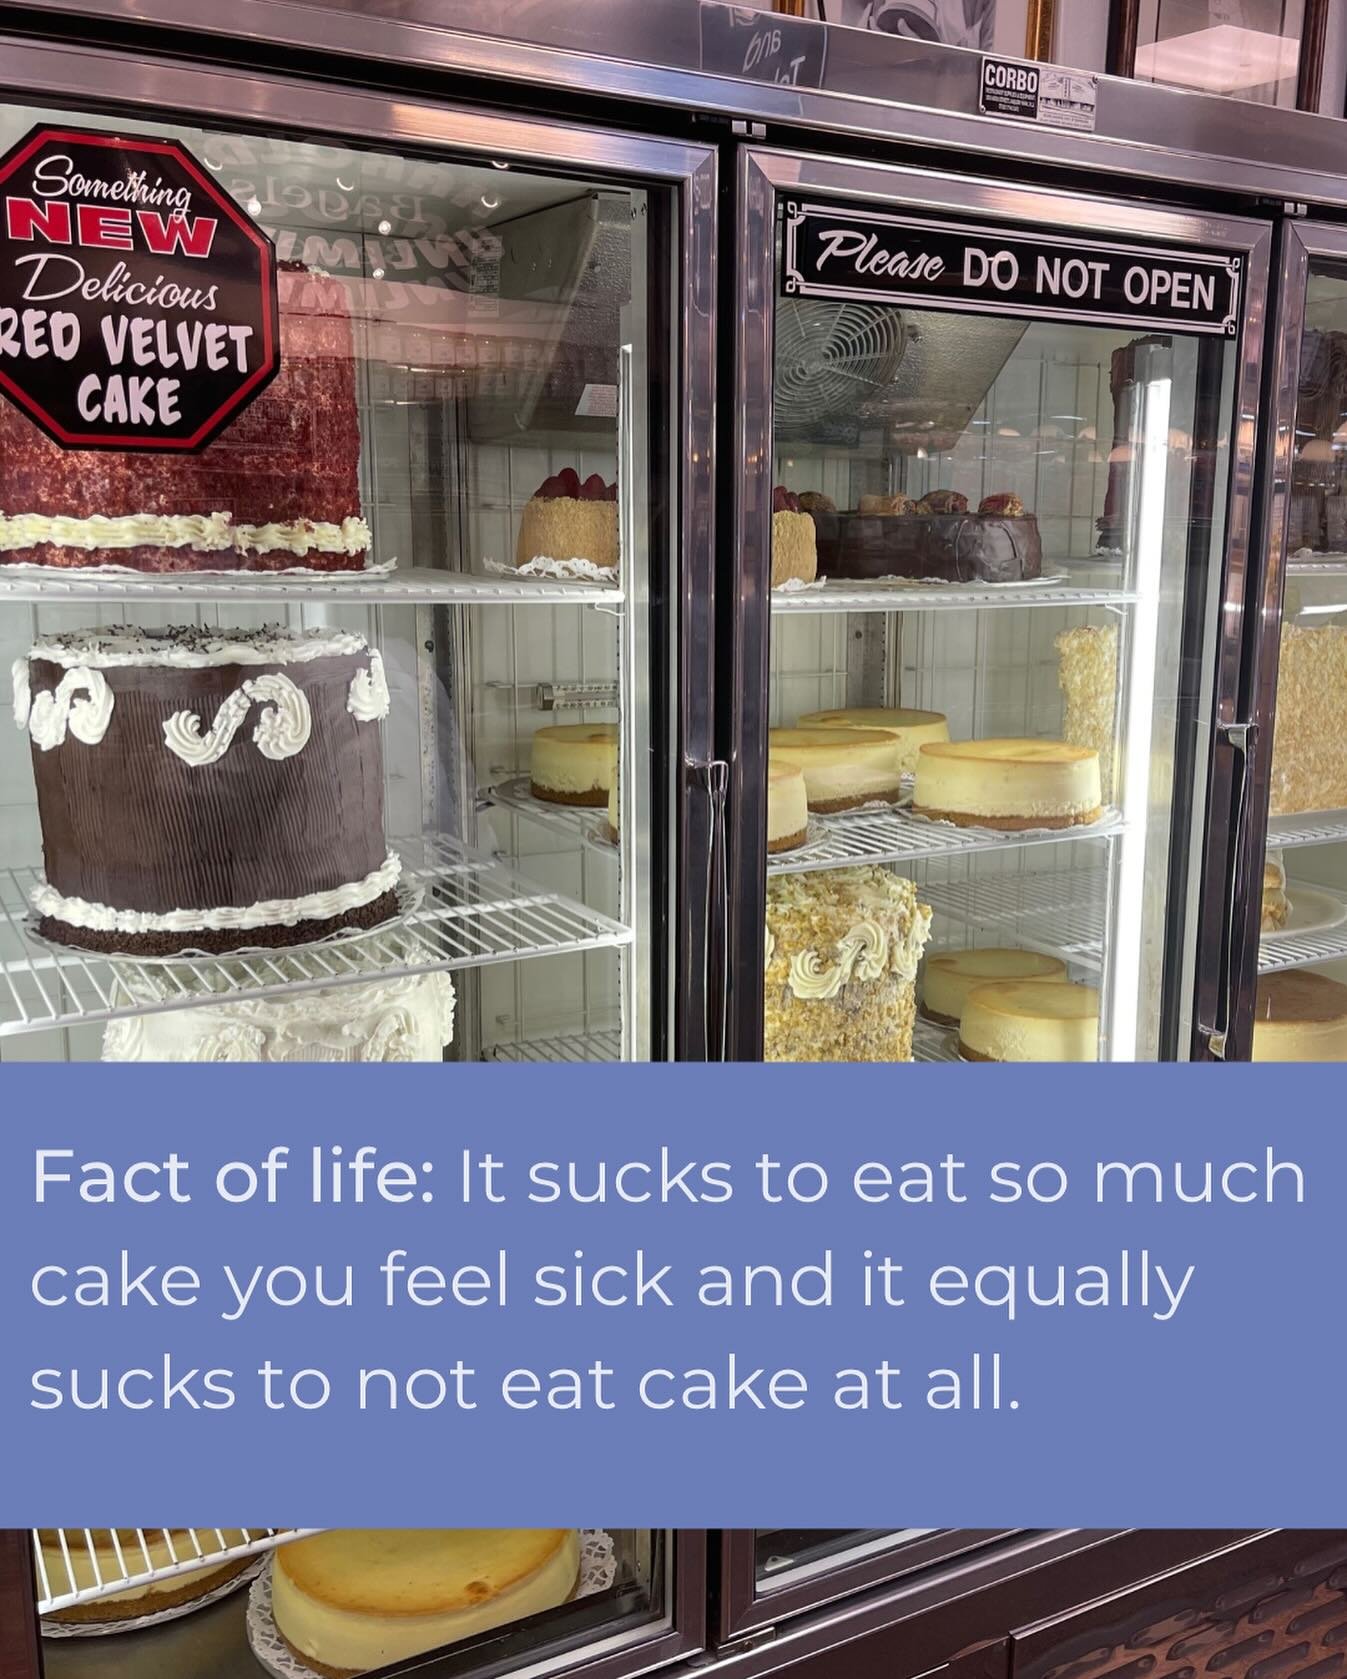 Fact of life: It sucks to eat so much cake you feel sick and it equally sucks to not eat cake at all. 

What do we do about it? 

Give yourself permission to have more cake later or tomorrow or the day after that so you can give yourself the space to